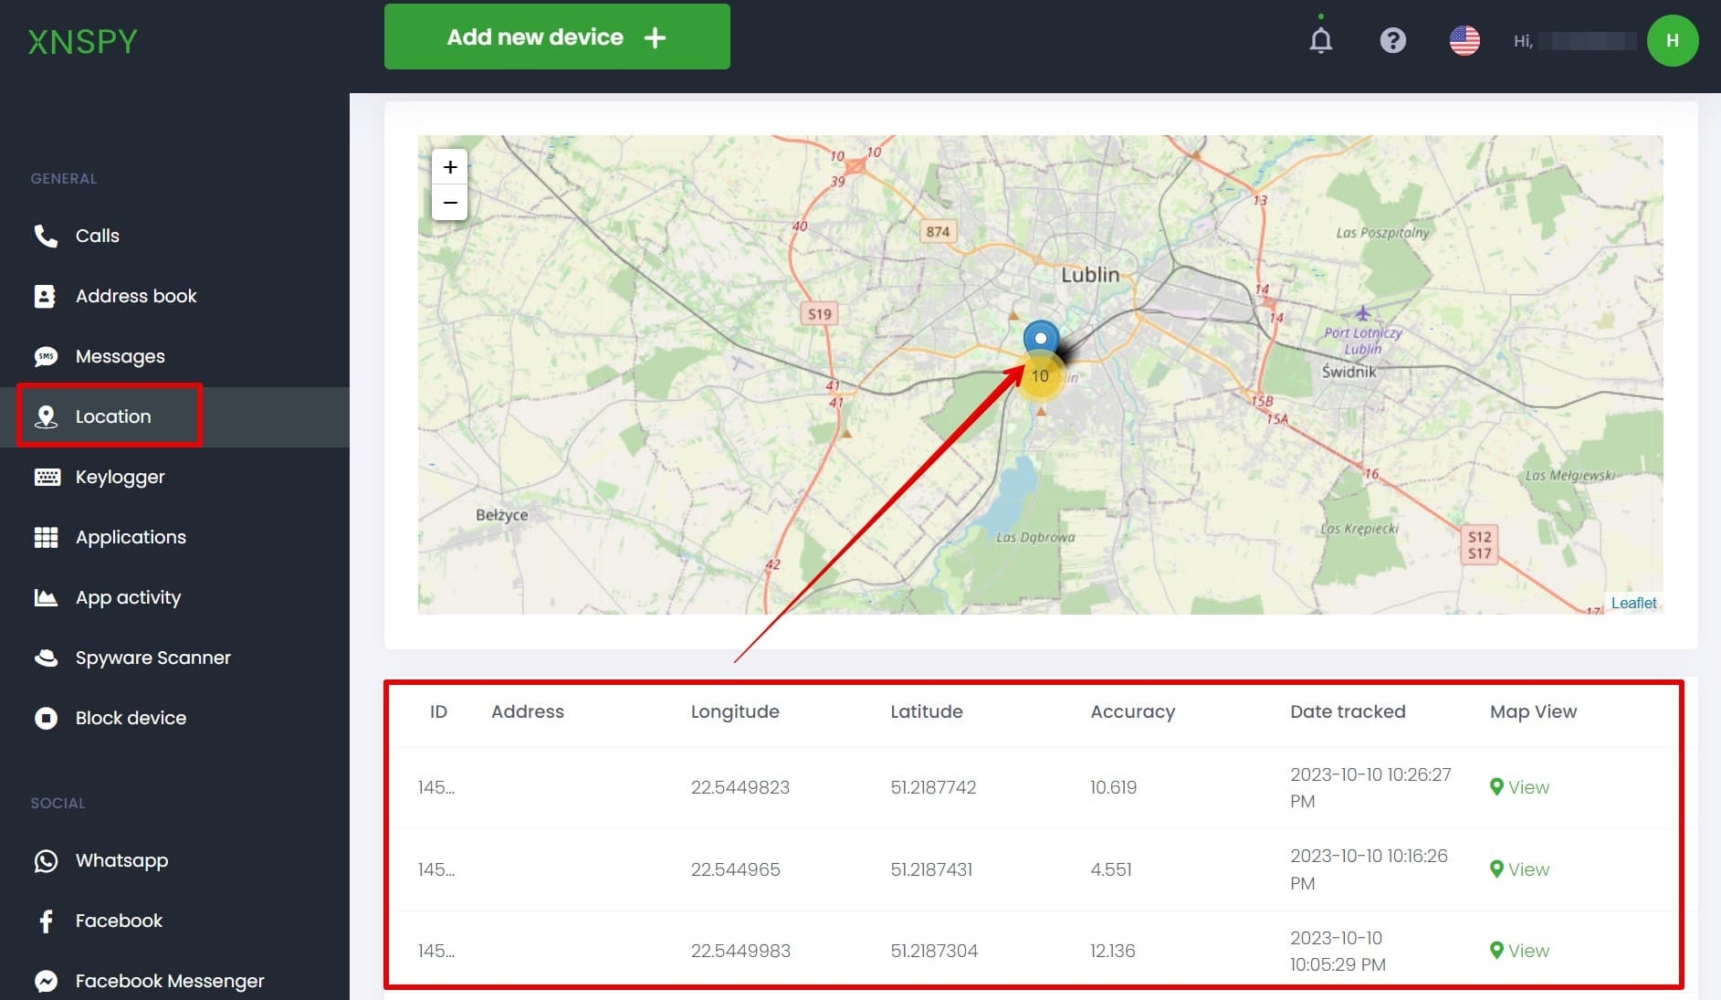 Location tracking view in the XNSPY control panel